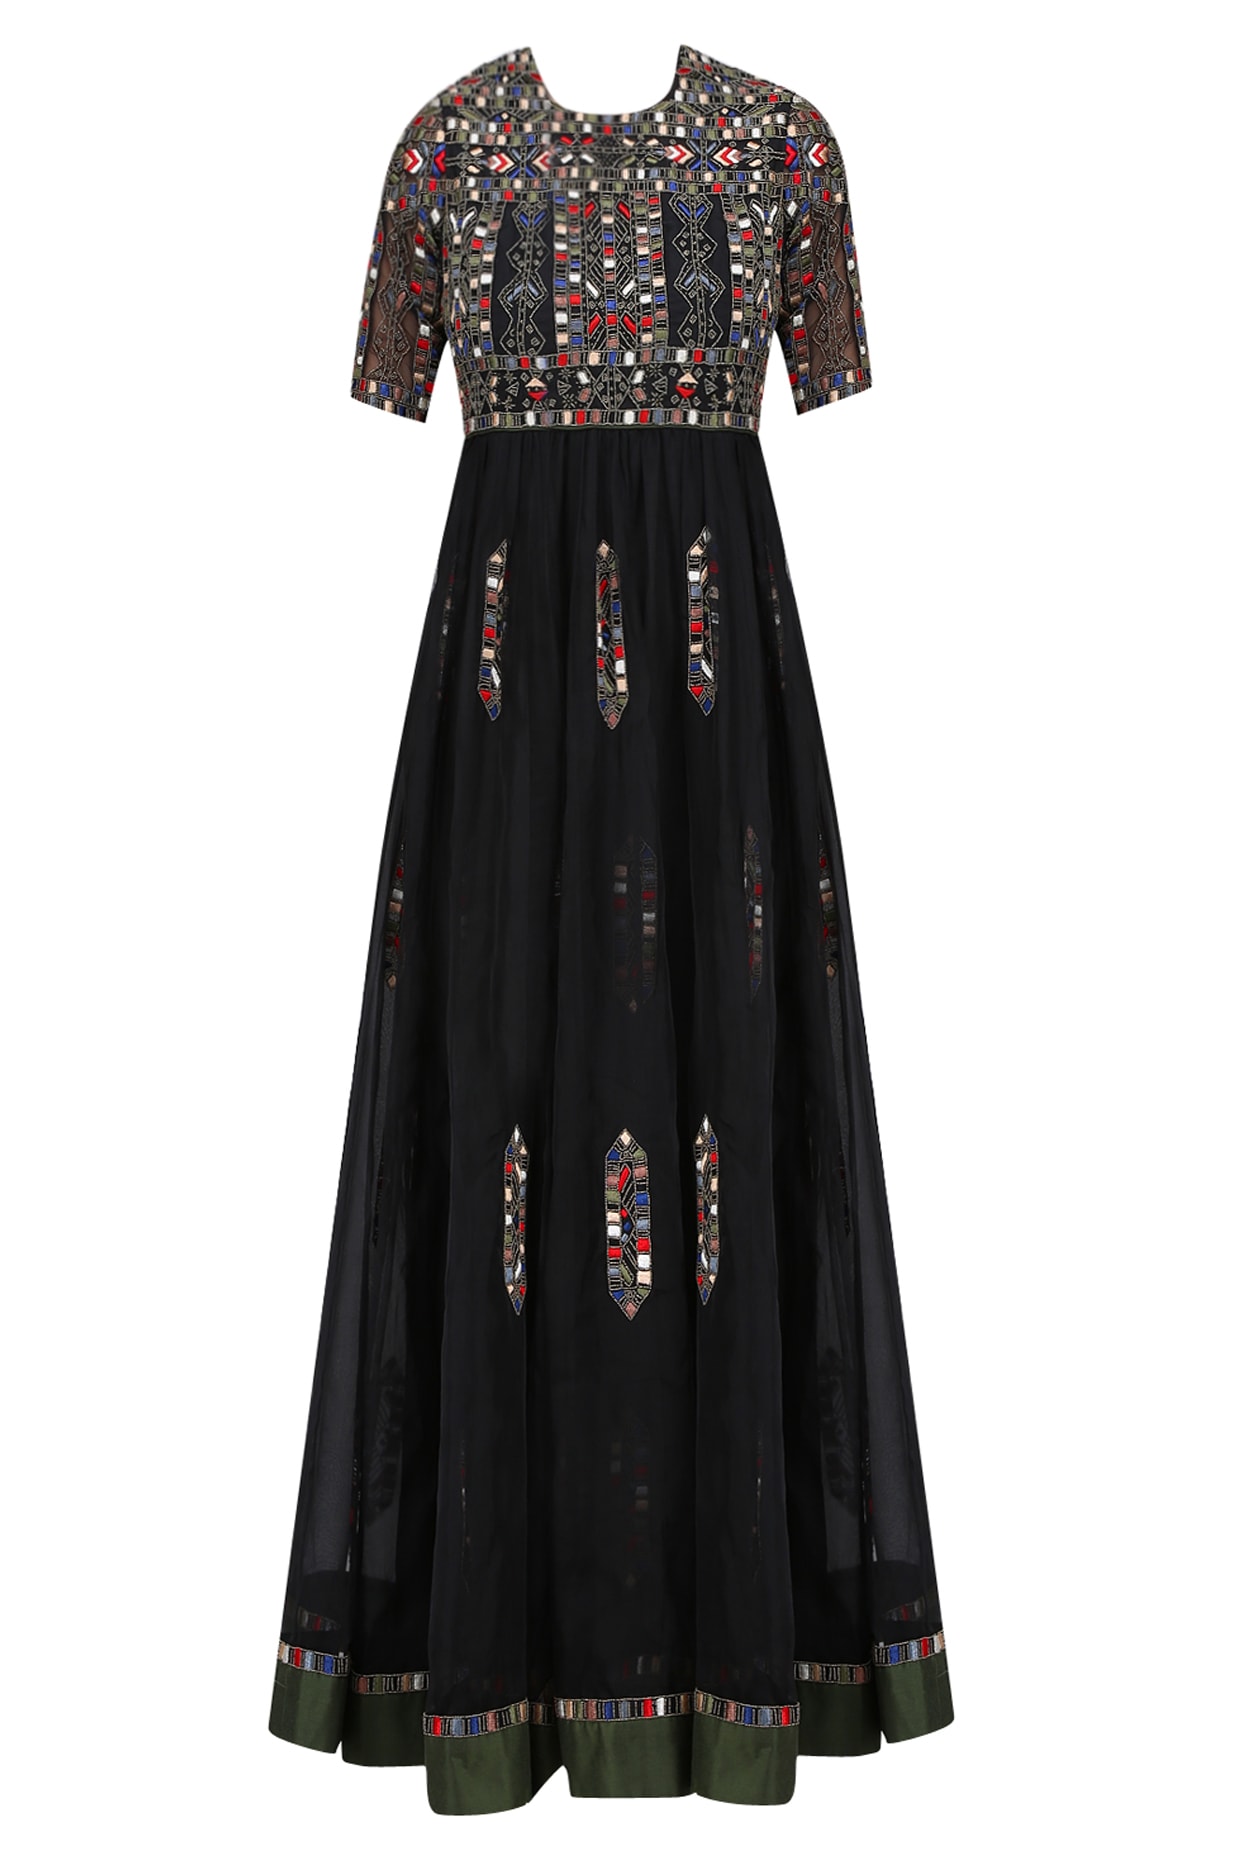 Black geometric pattern glass beads embroidered dress available